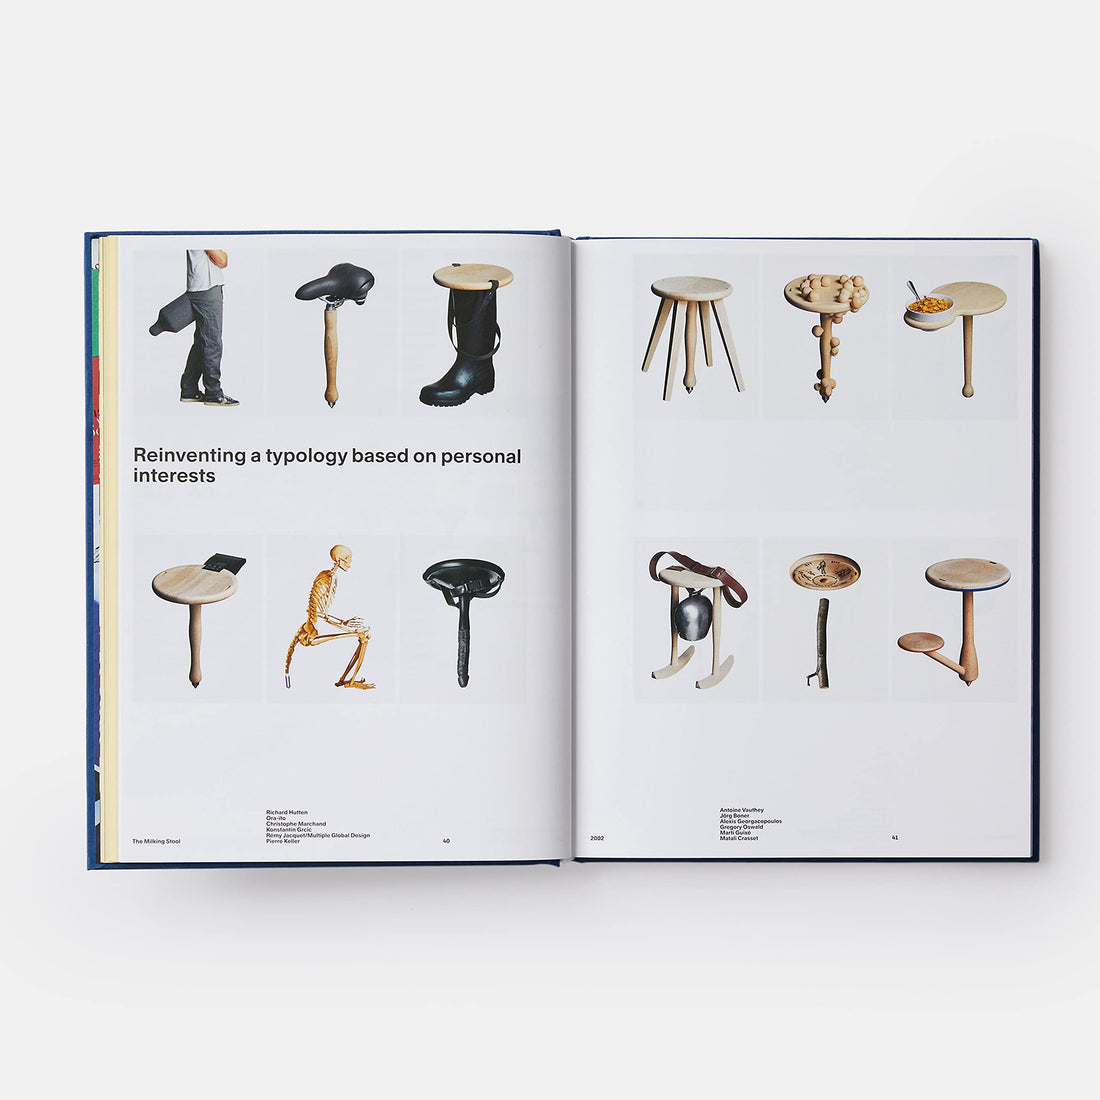 ECAL Manual of Style: How to best teach design today?